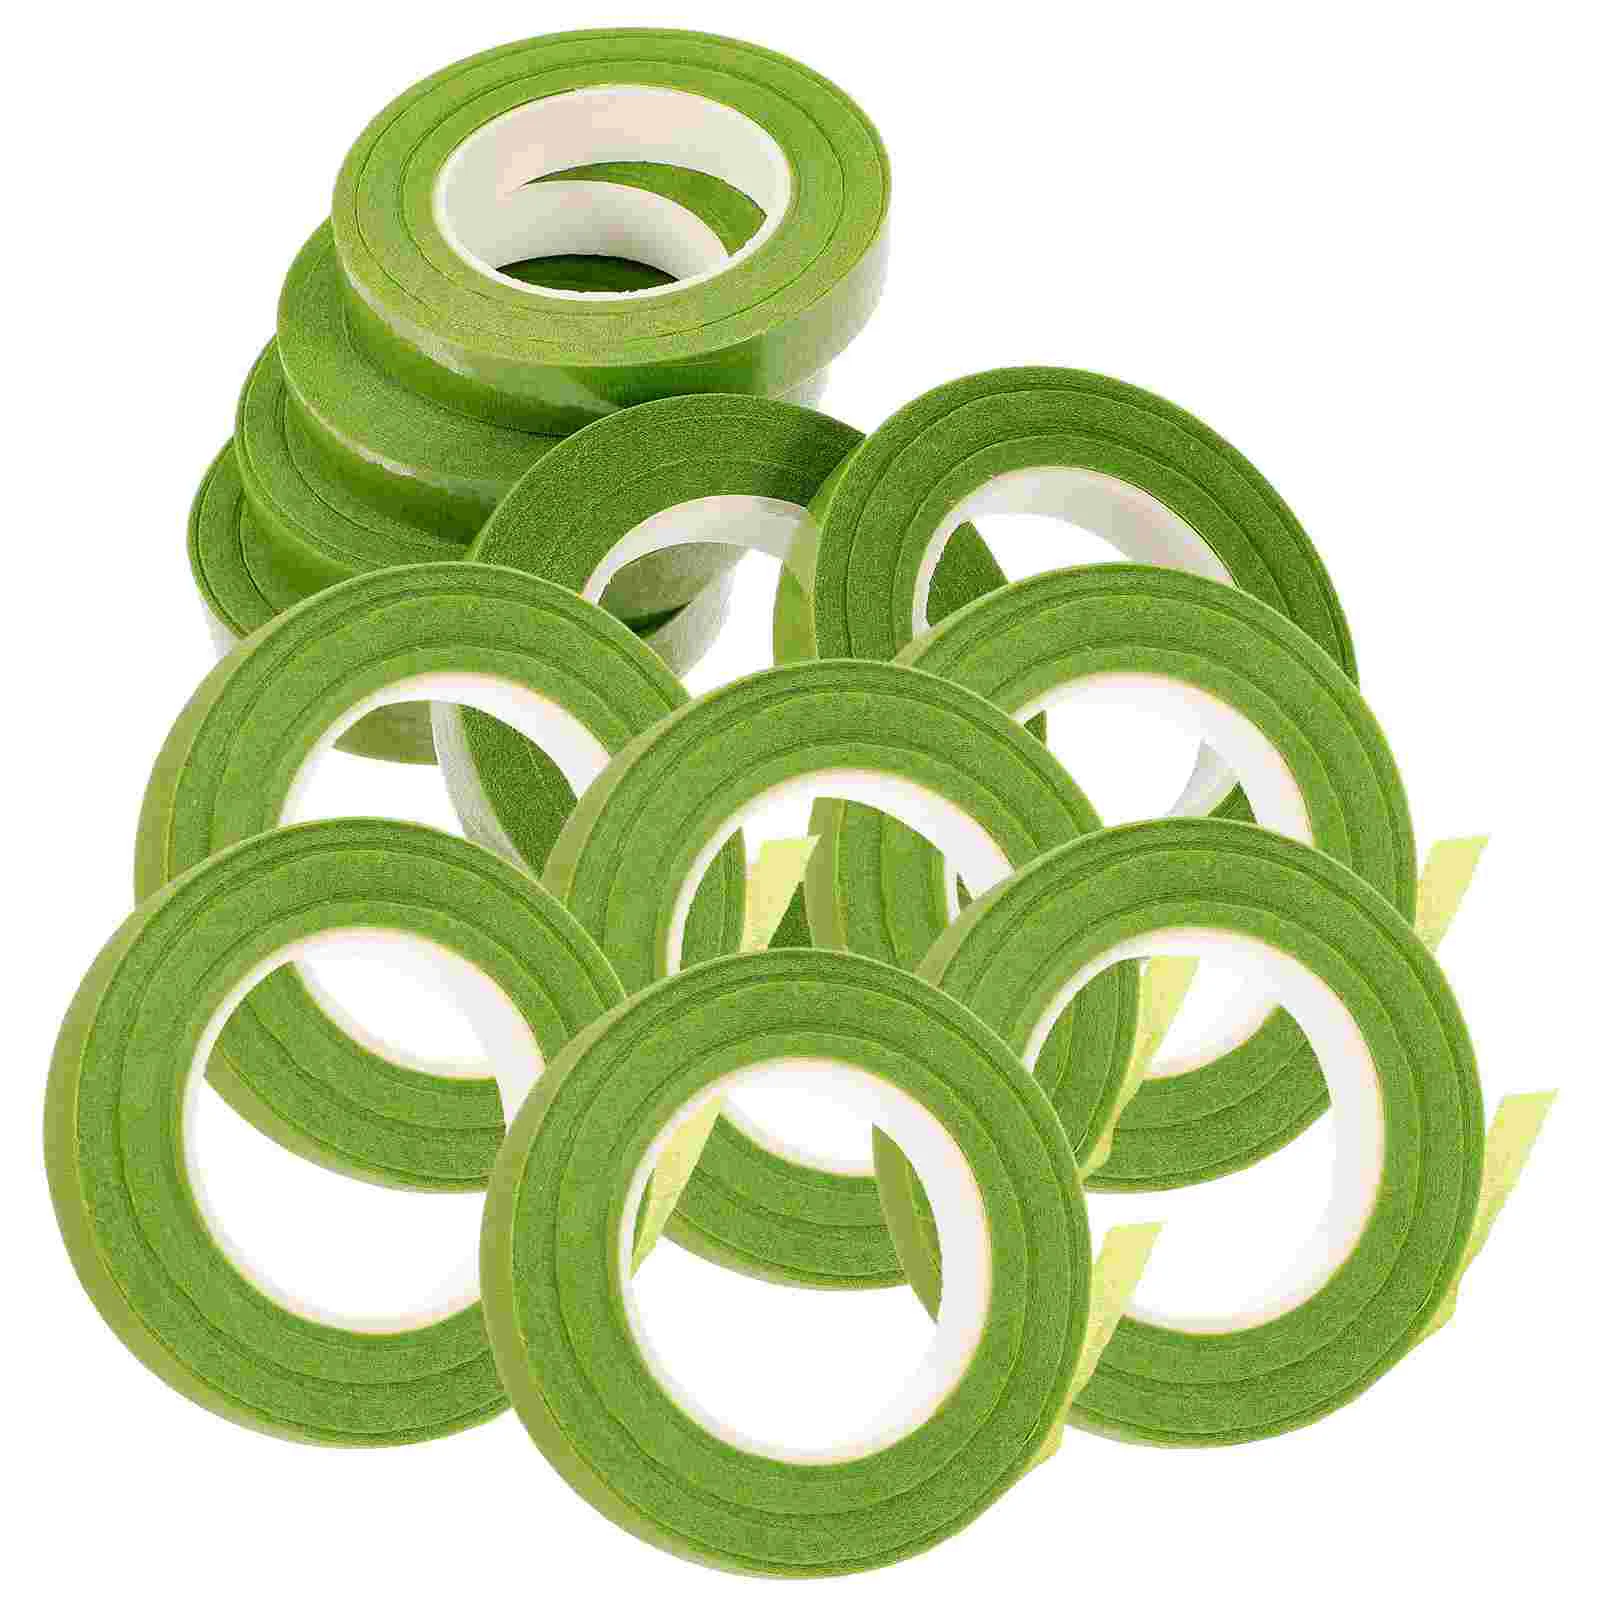 

12 Rolls of Floral Tape Florist Wraps DIY Flower Supplies for Bouquet Stem Wrapping